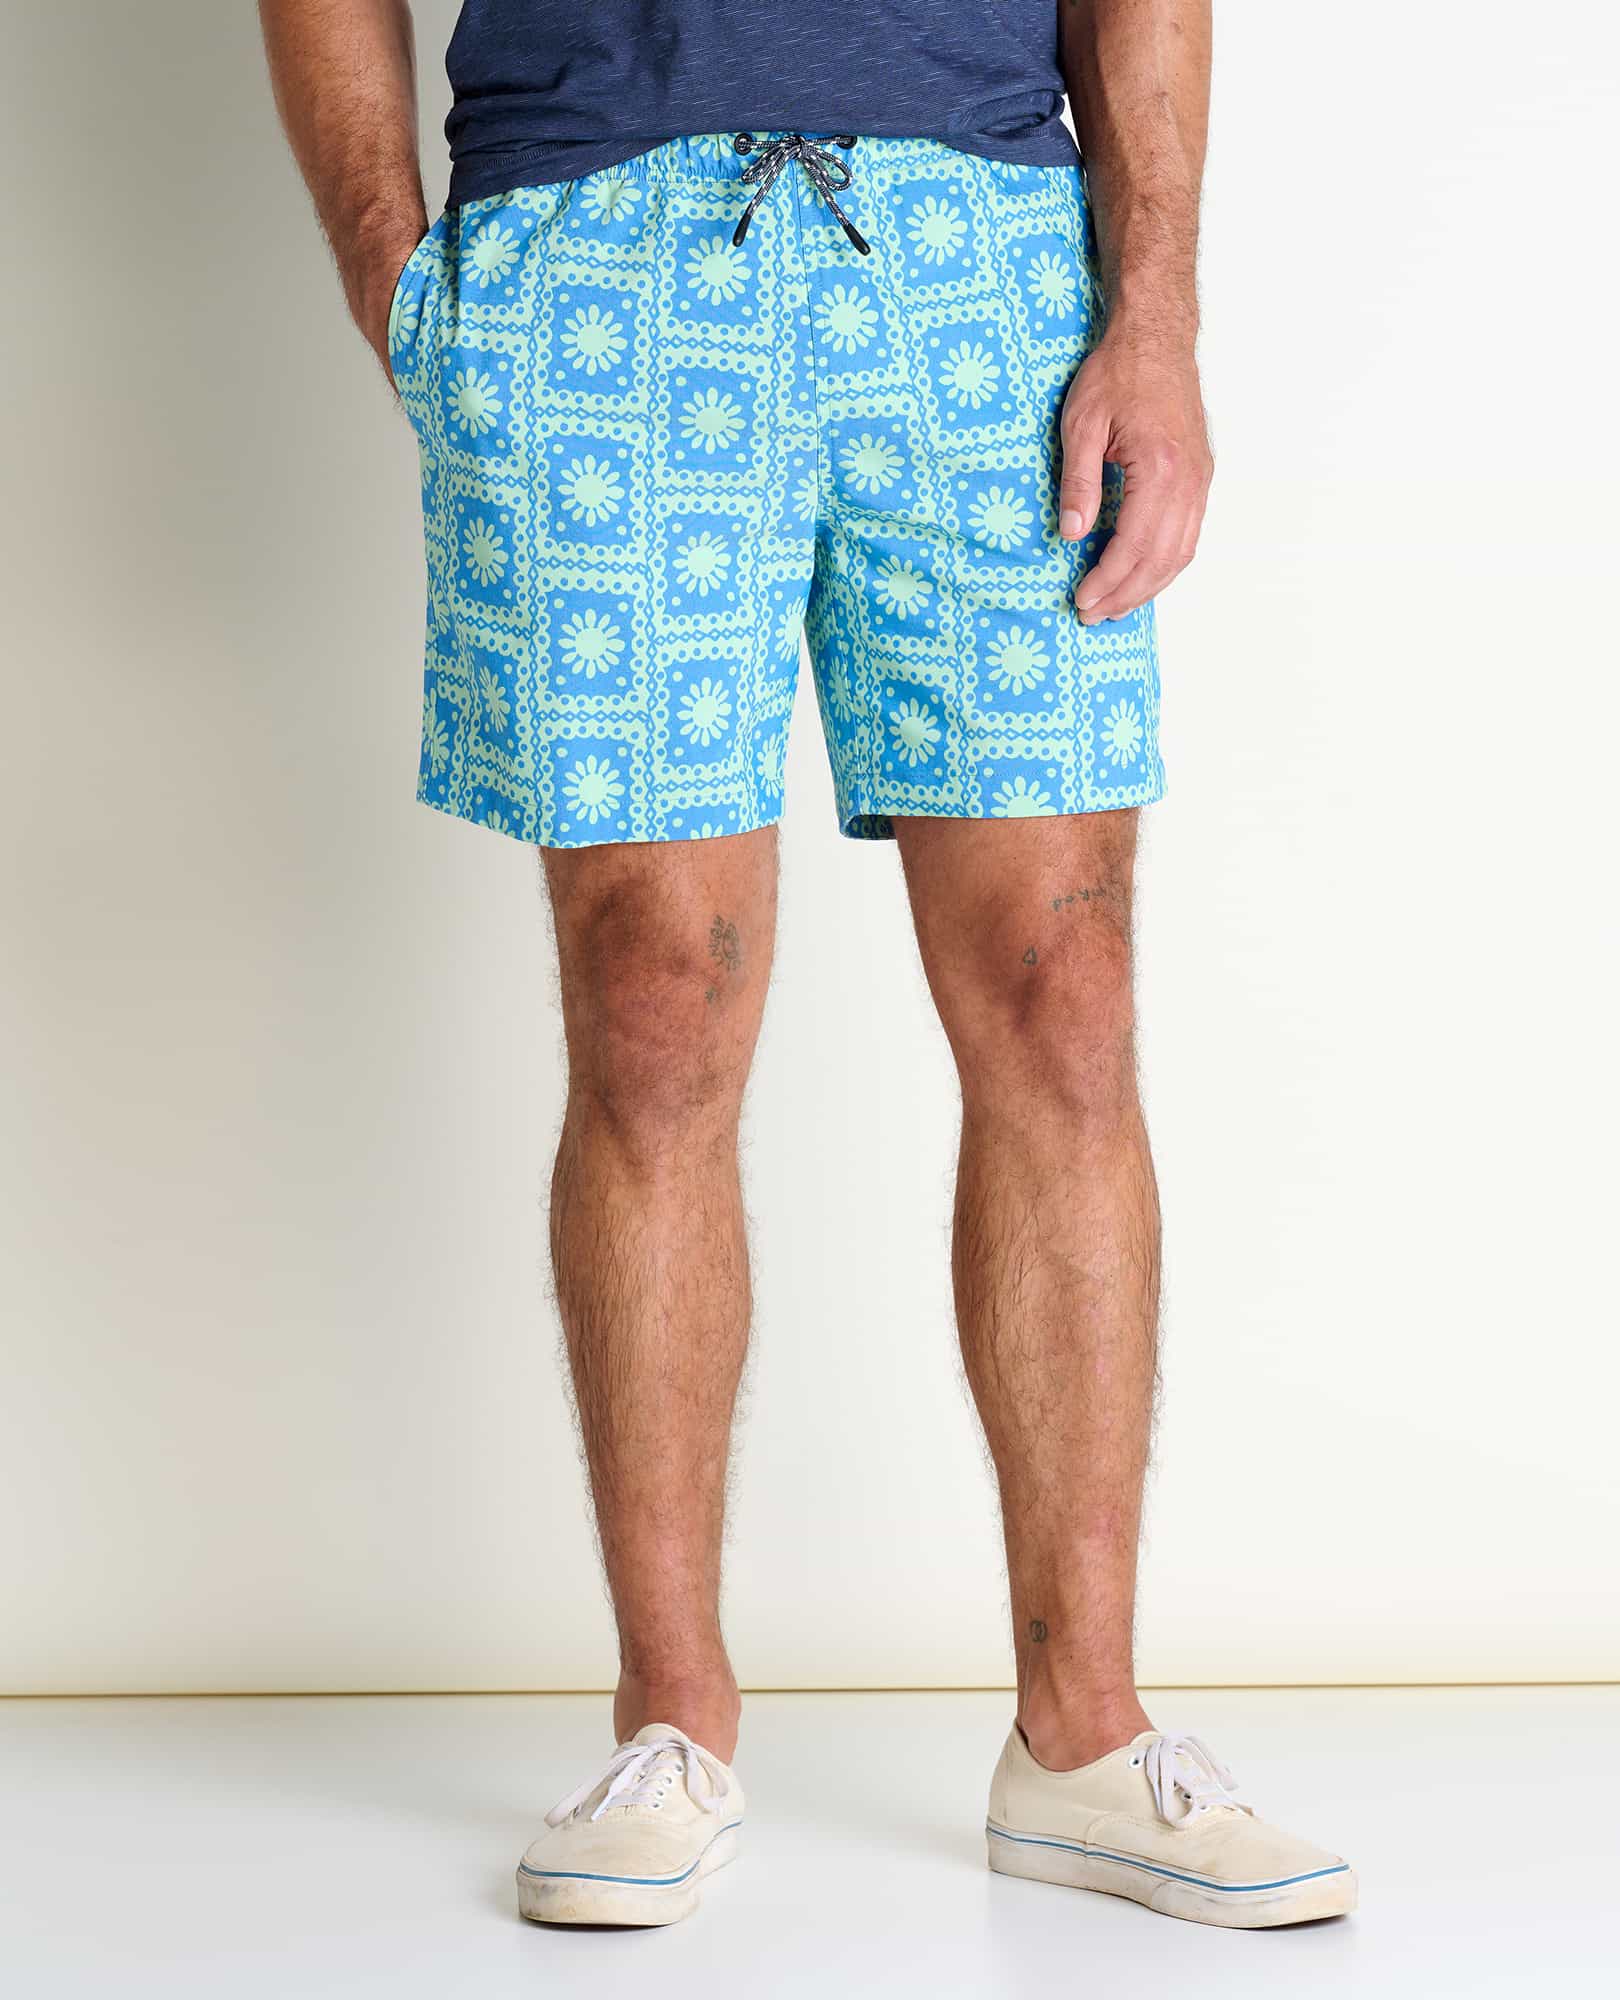 M's Boundless Pull-On Short